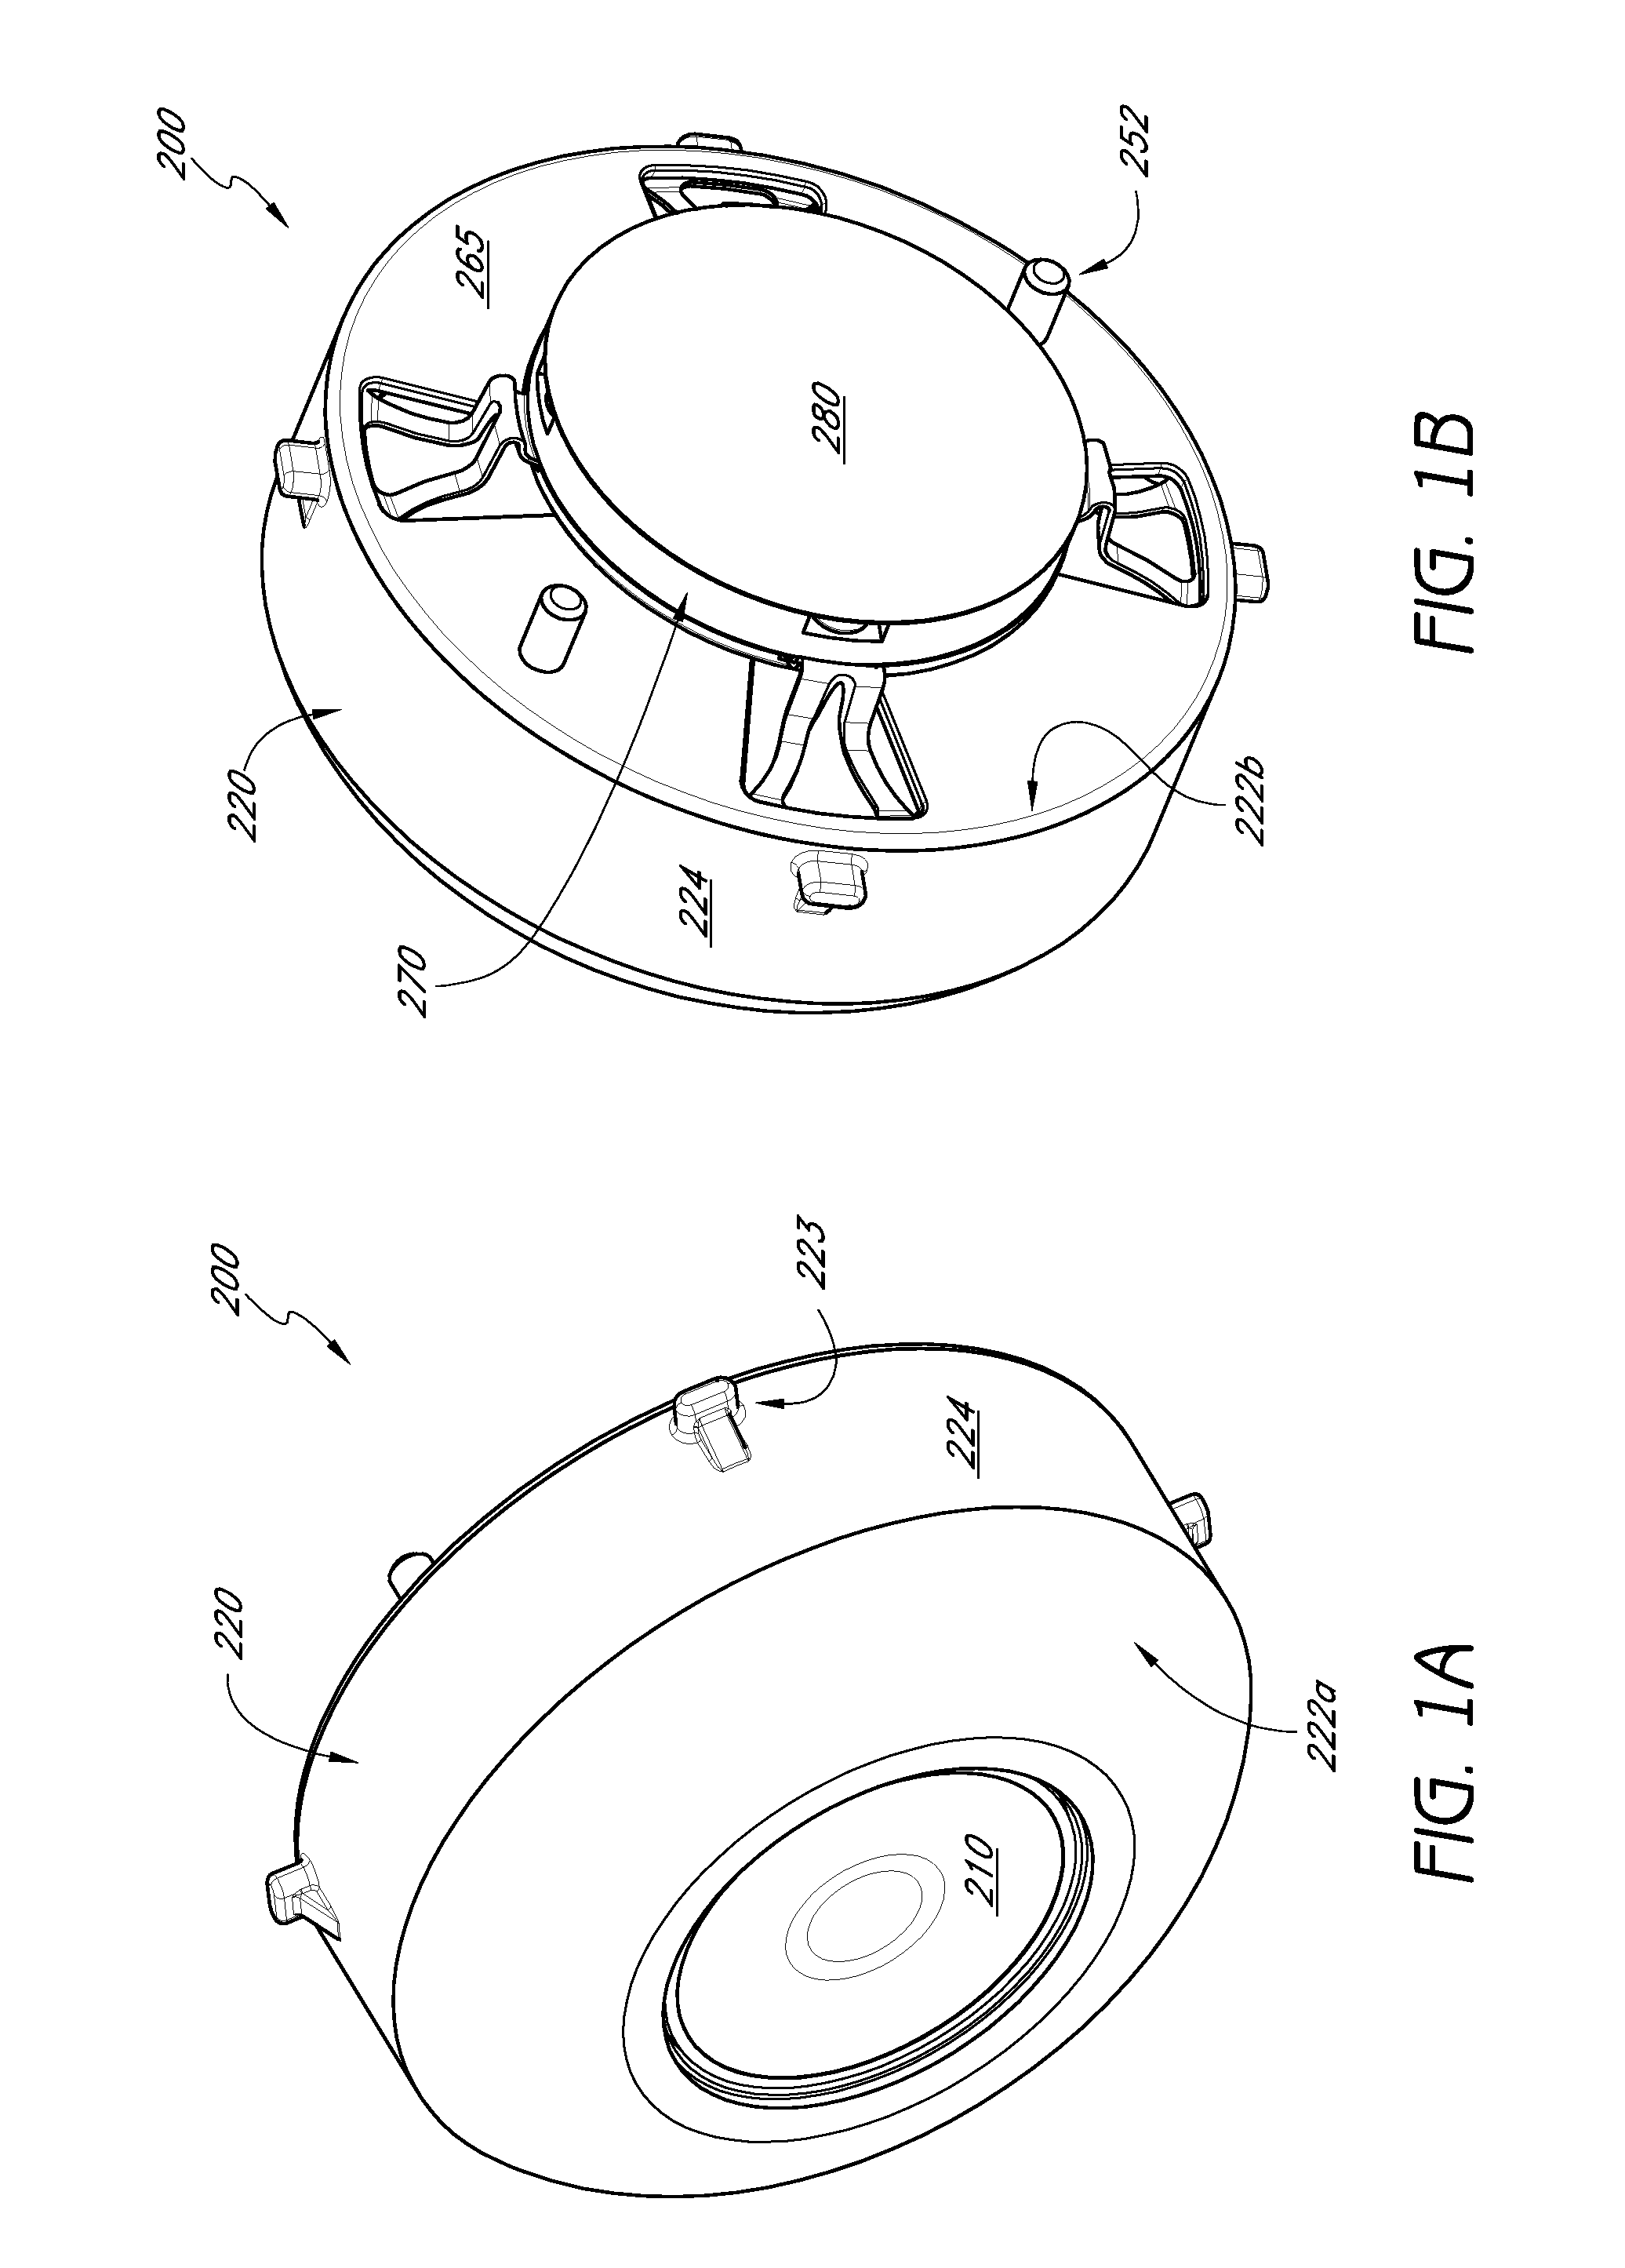 LED light module for use in a lighting assembly